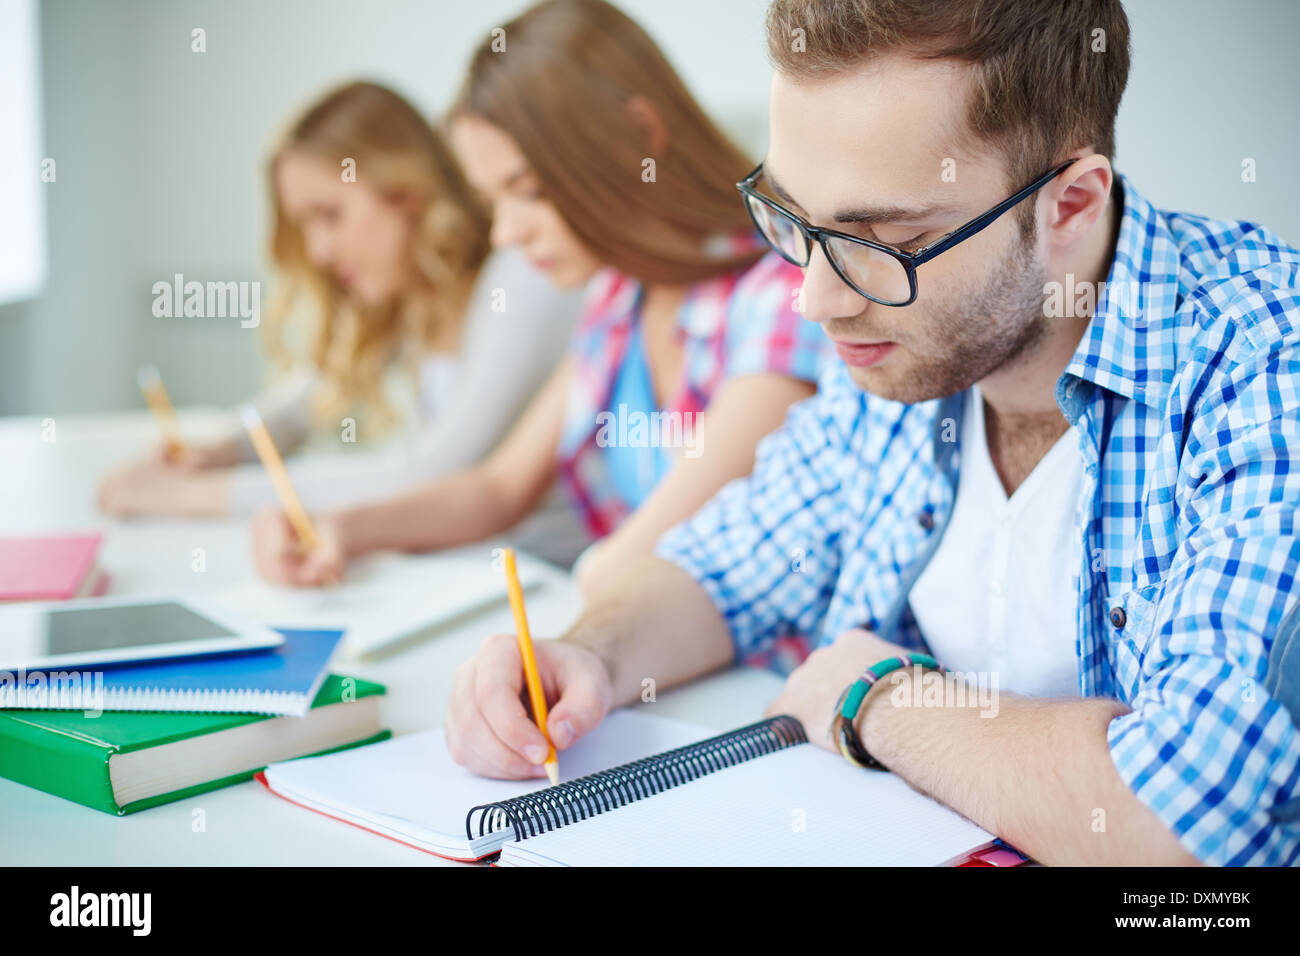 Serious guy and his groupmates on background carrying out written task at lesson Stock Photo